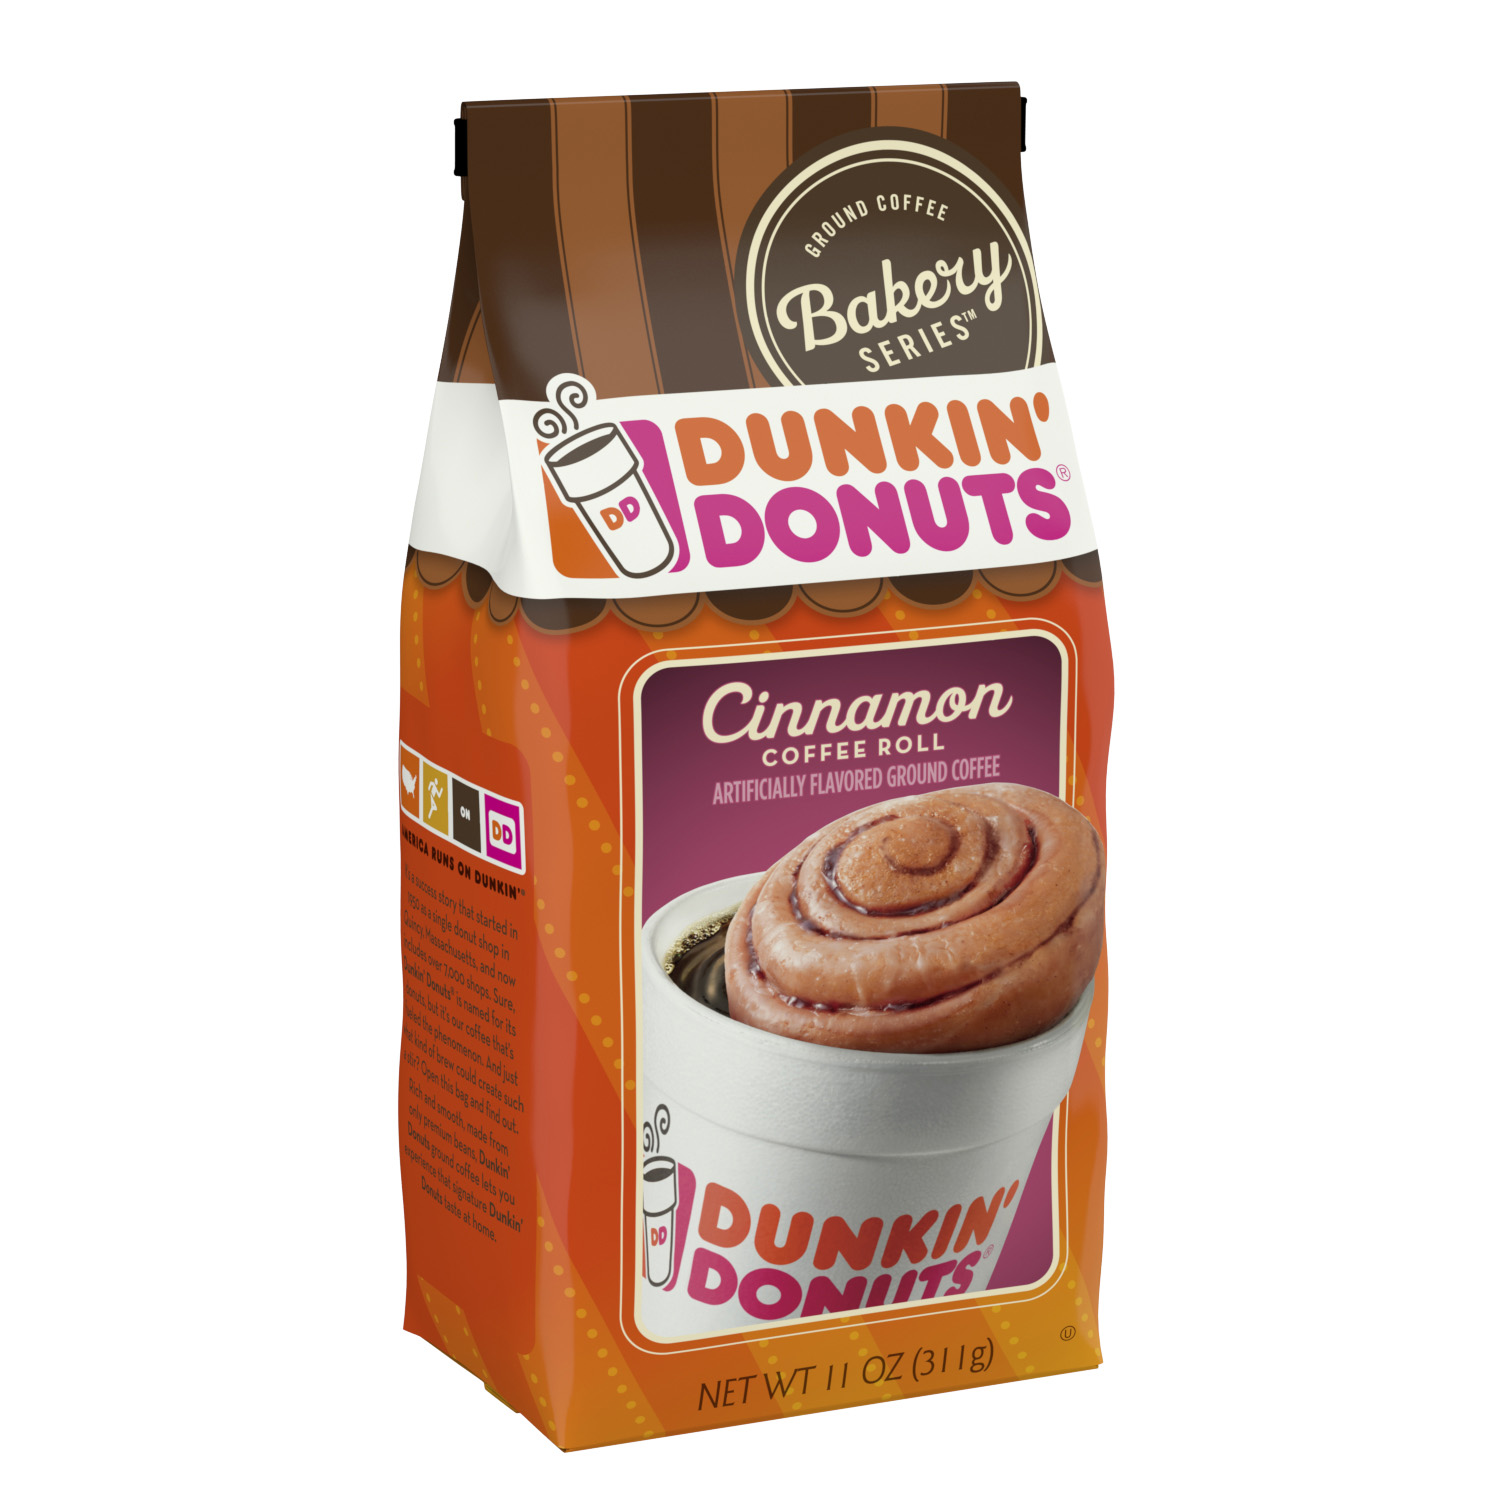 DUNKIN’ DONUTS® BAGGED COFFEE AND HUNGRY GIRL TEAM UP FOR